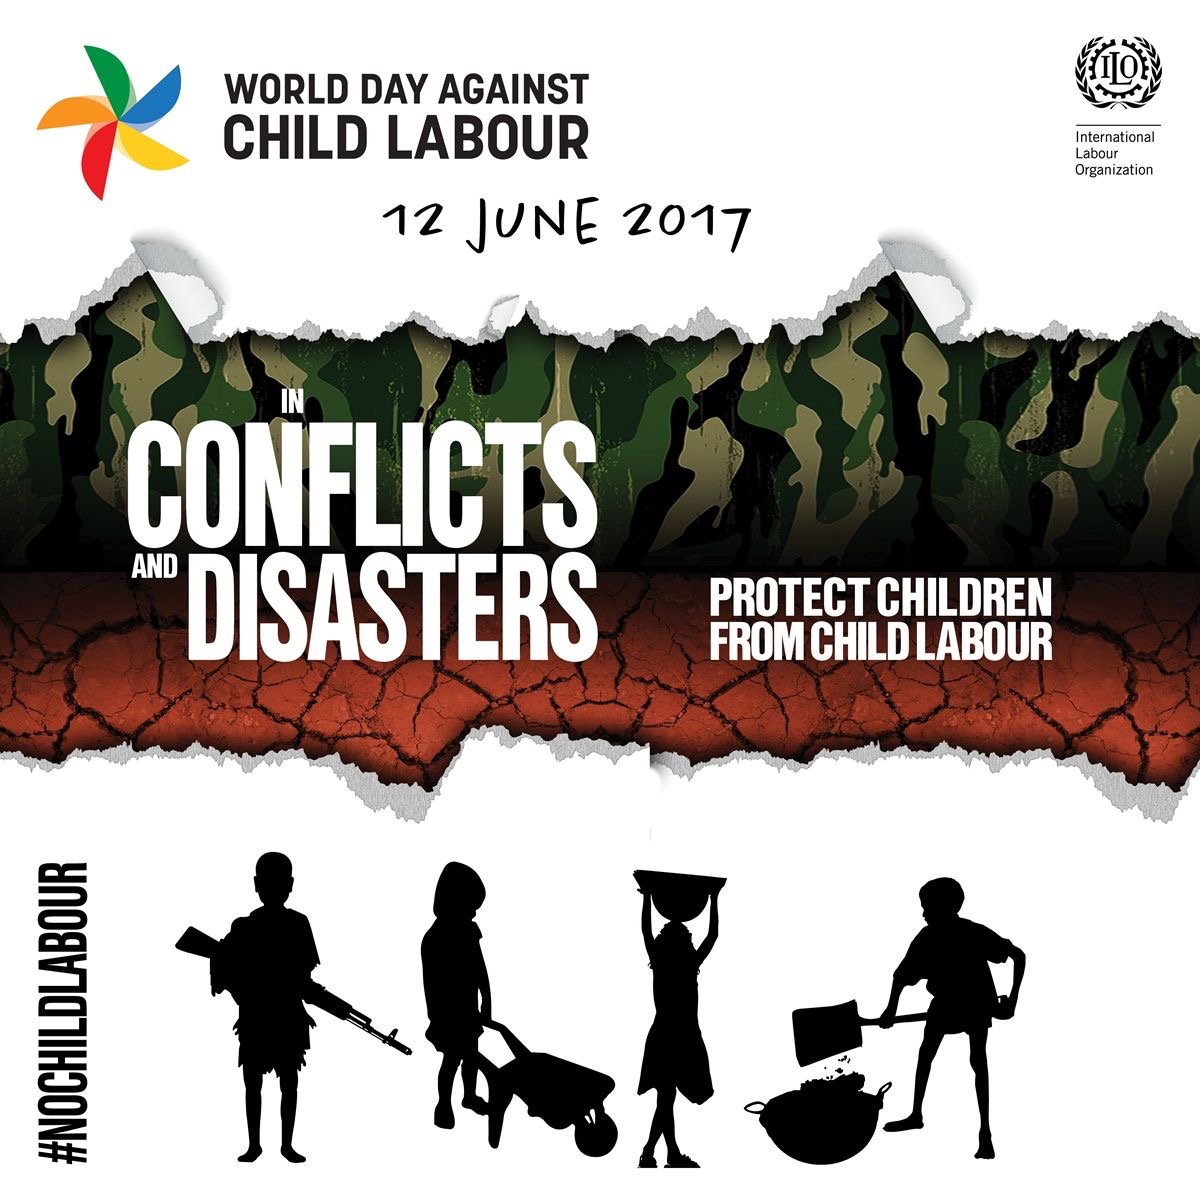 Unyouth Today Is World Day Against Child Labour Spread The Word Nochildlabour T Co 6hkqac40dk Un4youth Sdgs